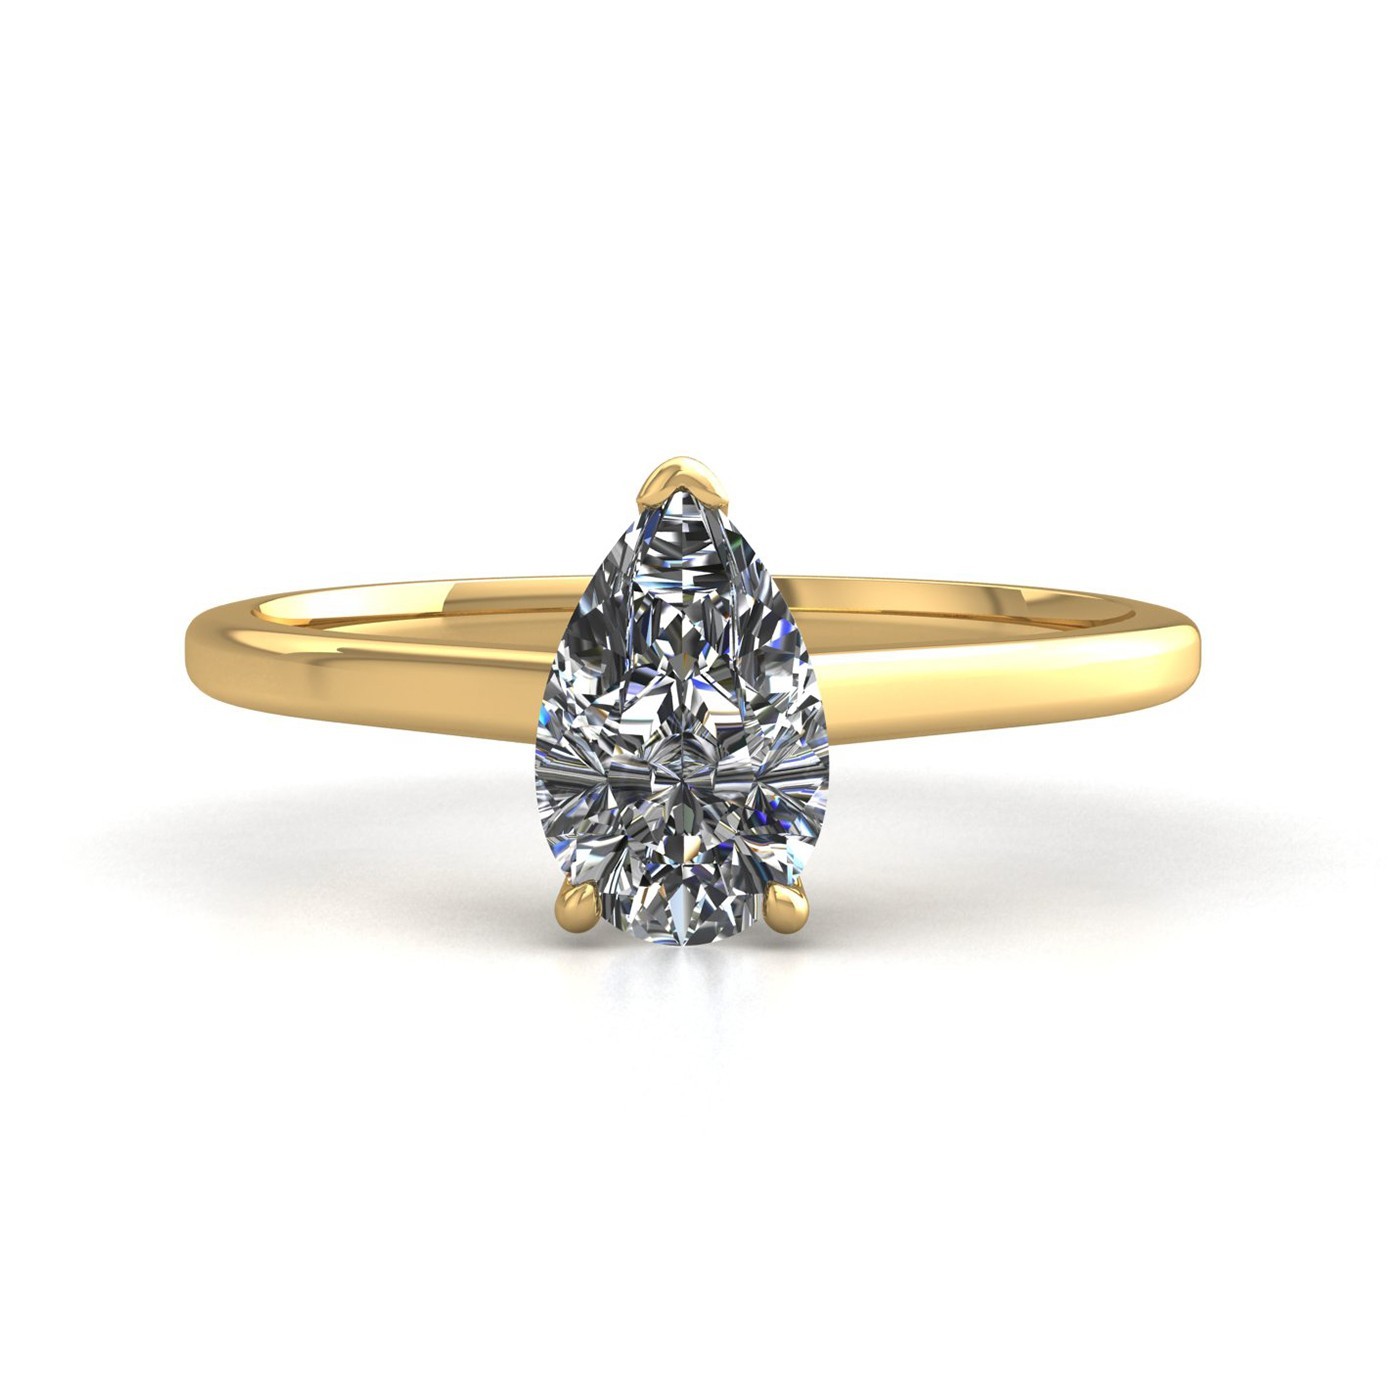 18k yellow gold  0,80 ct 3 prongs solitaire pear cut diamond engagement ring with whisper thin band Photos & images